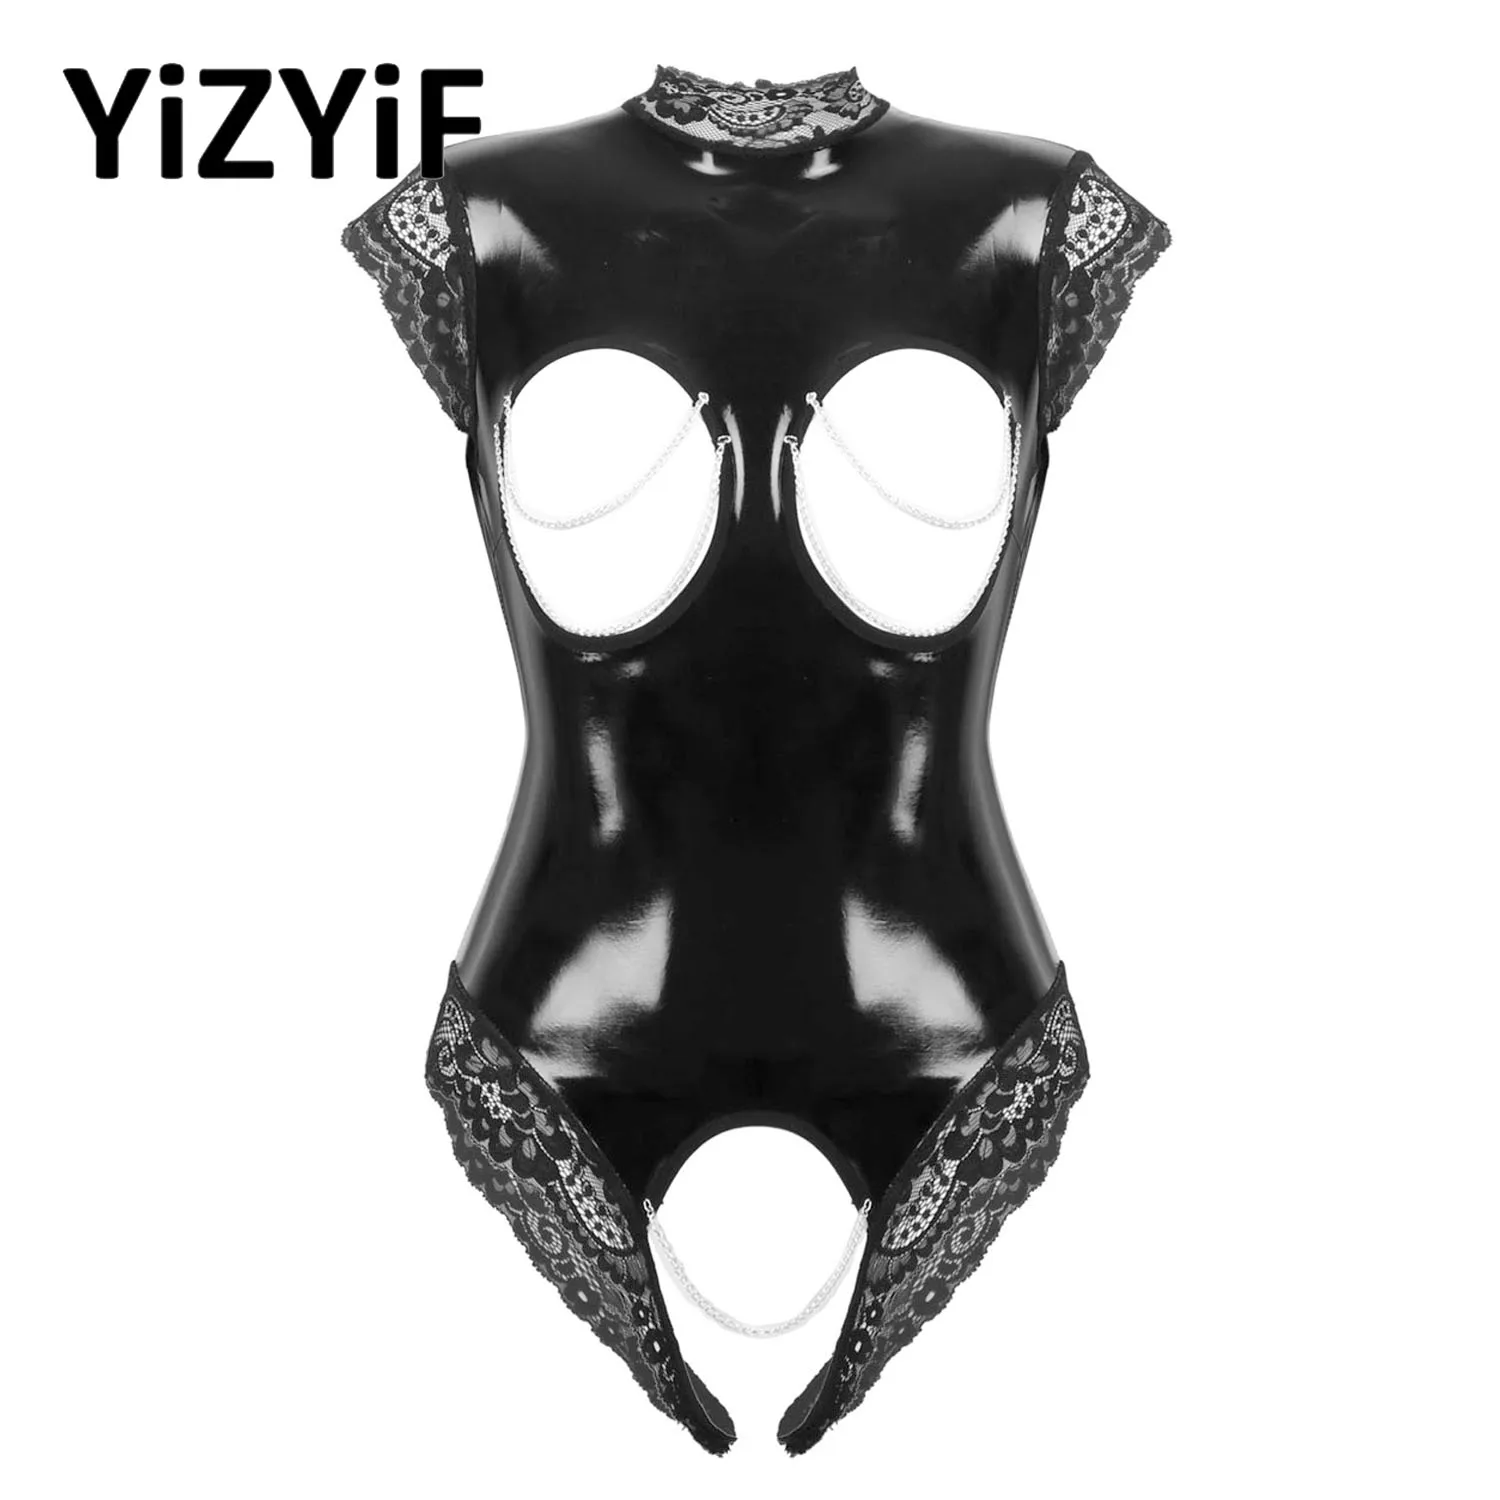 

Womens Sexy Wetlook Open Breast Crotchless Leotard Erotic Latex Patent Leather Lace Trimmed Catsuit Bodysuit Nightwear